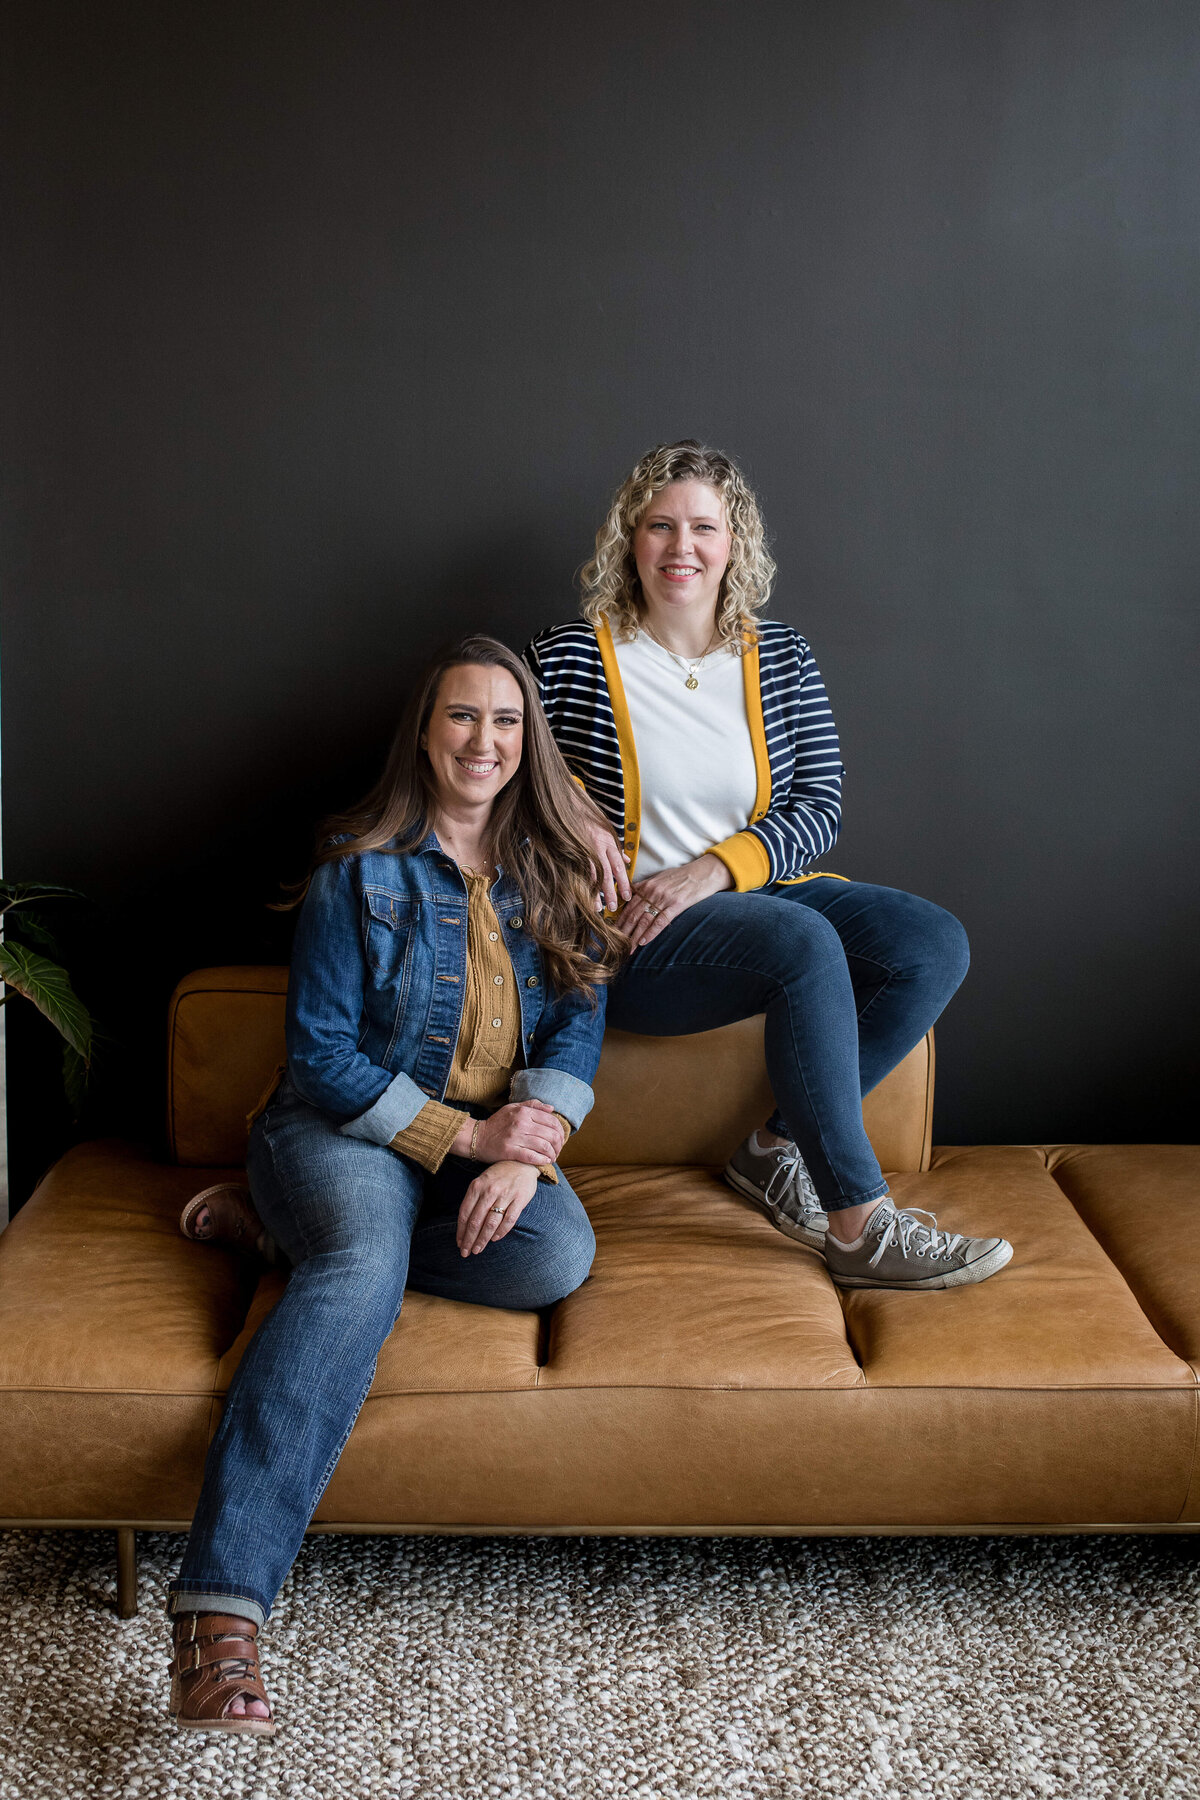 brand photographer near me captures two business women sitting on a brown leather sofa and a studio session for brand photo shoot in Orlando